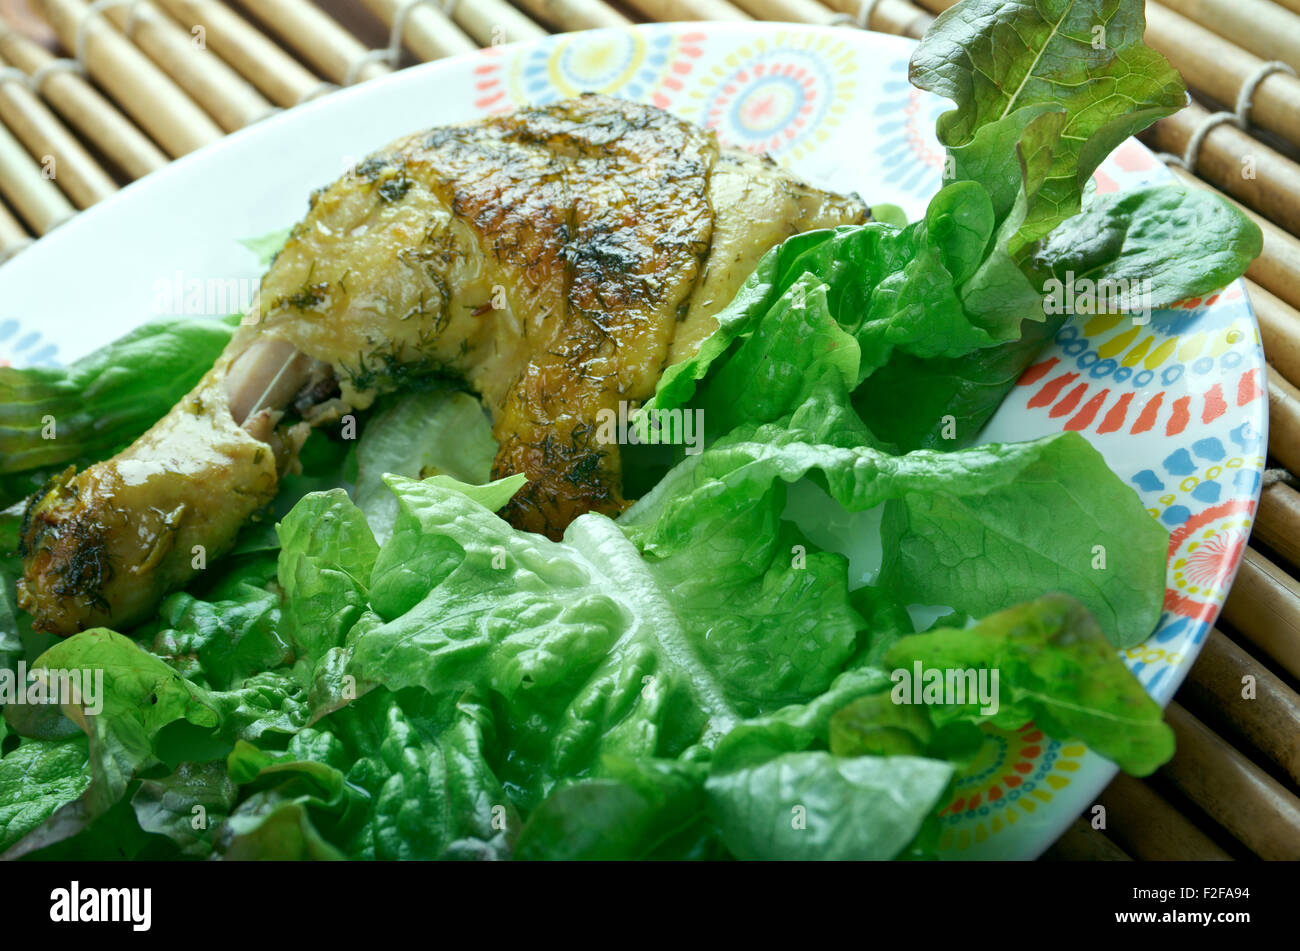 Indian Garlic Chicken served with lettuce Stock Photo